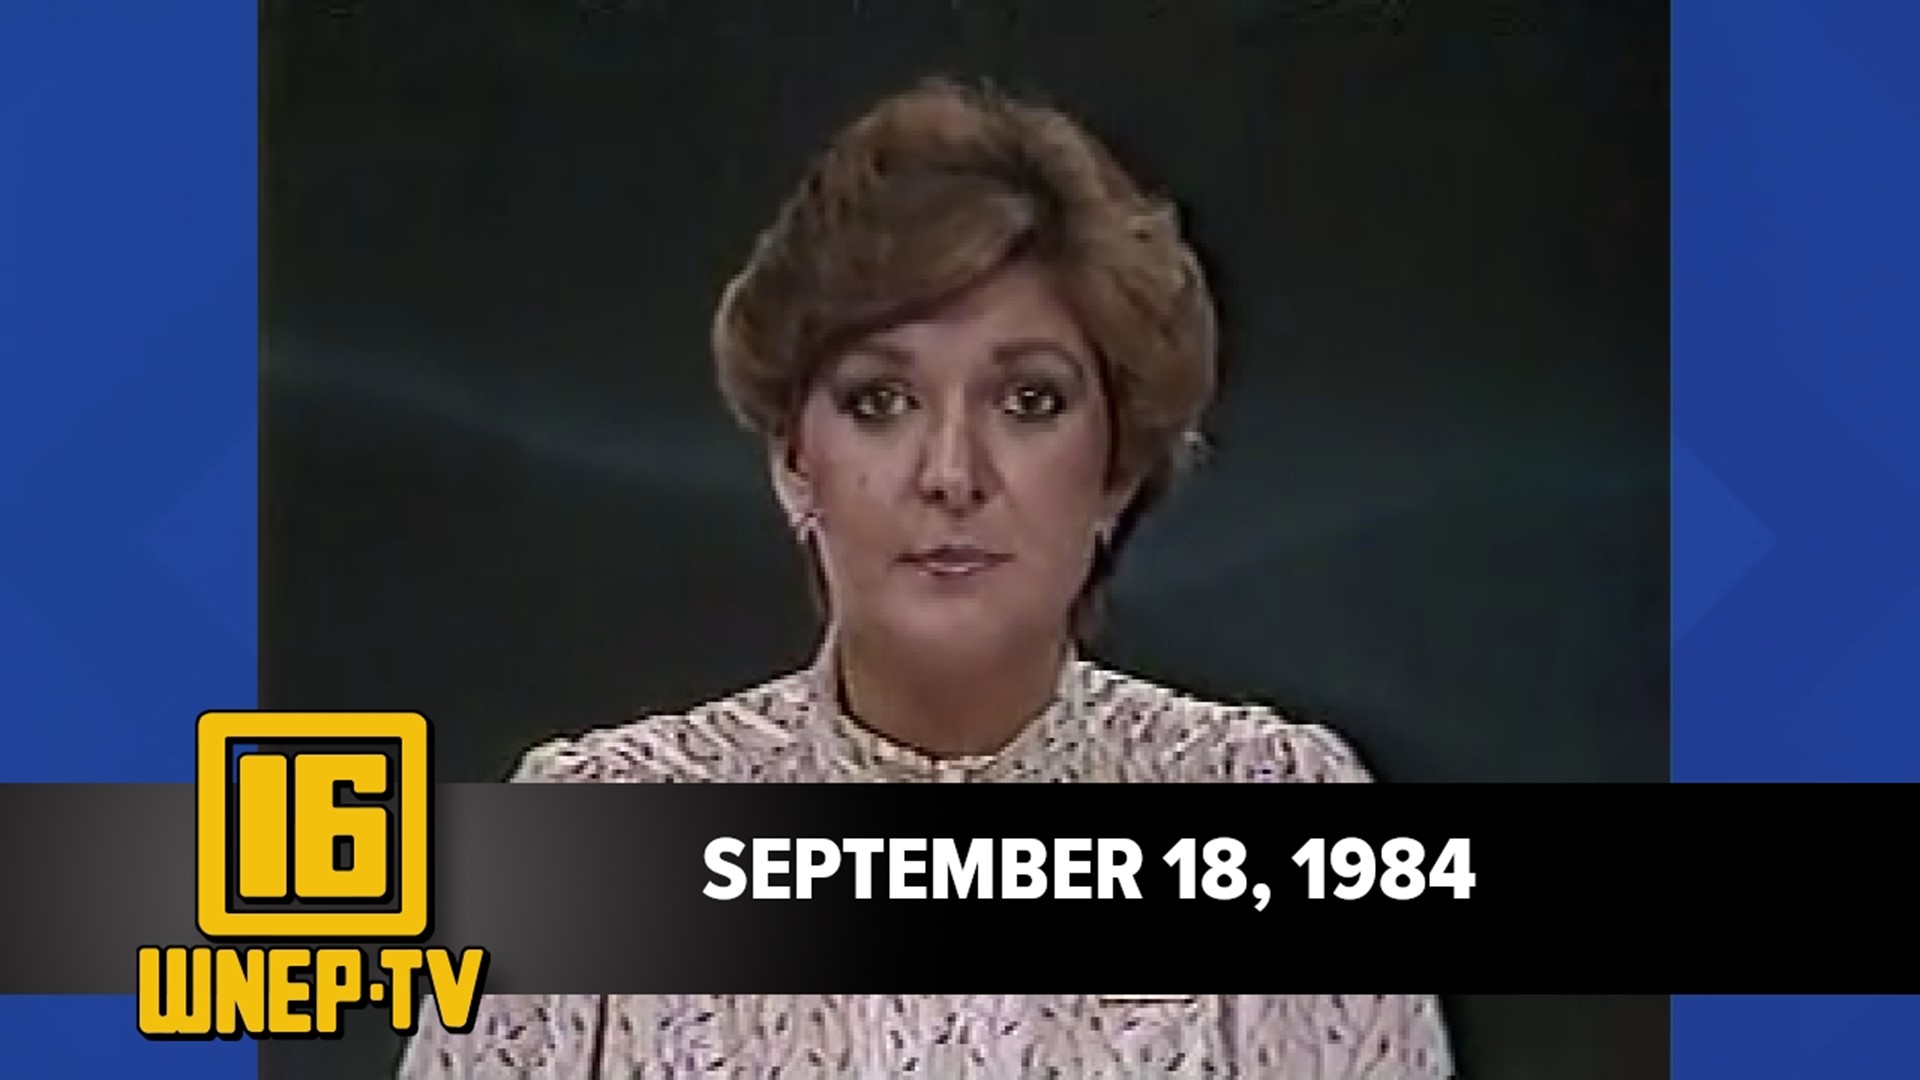 Join Karen Harch and Nolan Johannes with curated stories from September 18, 1984.